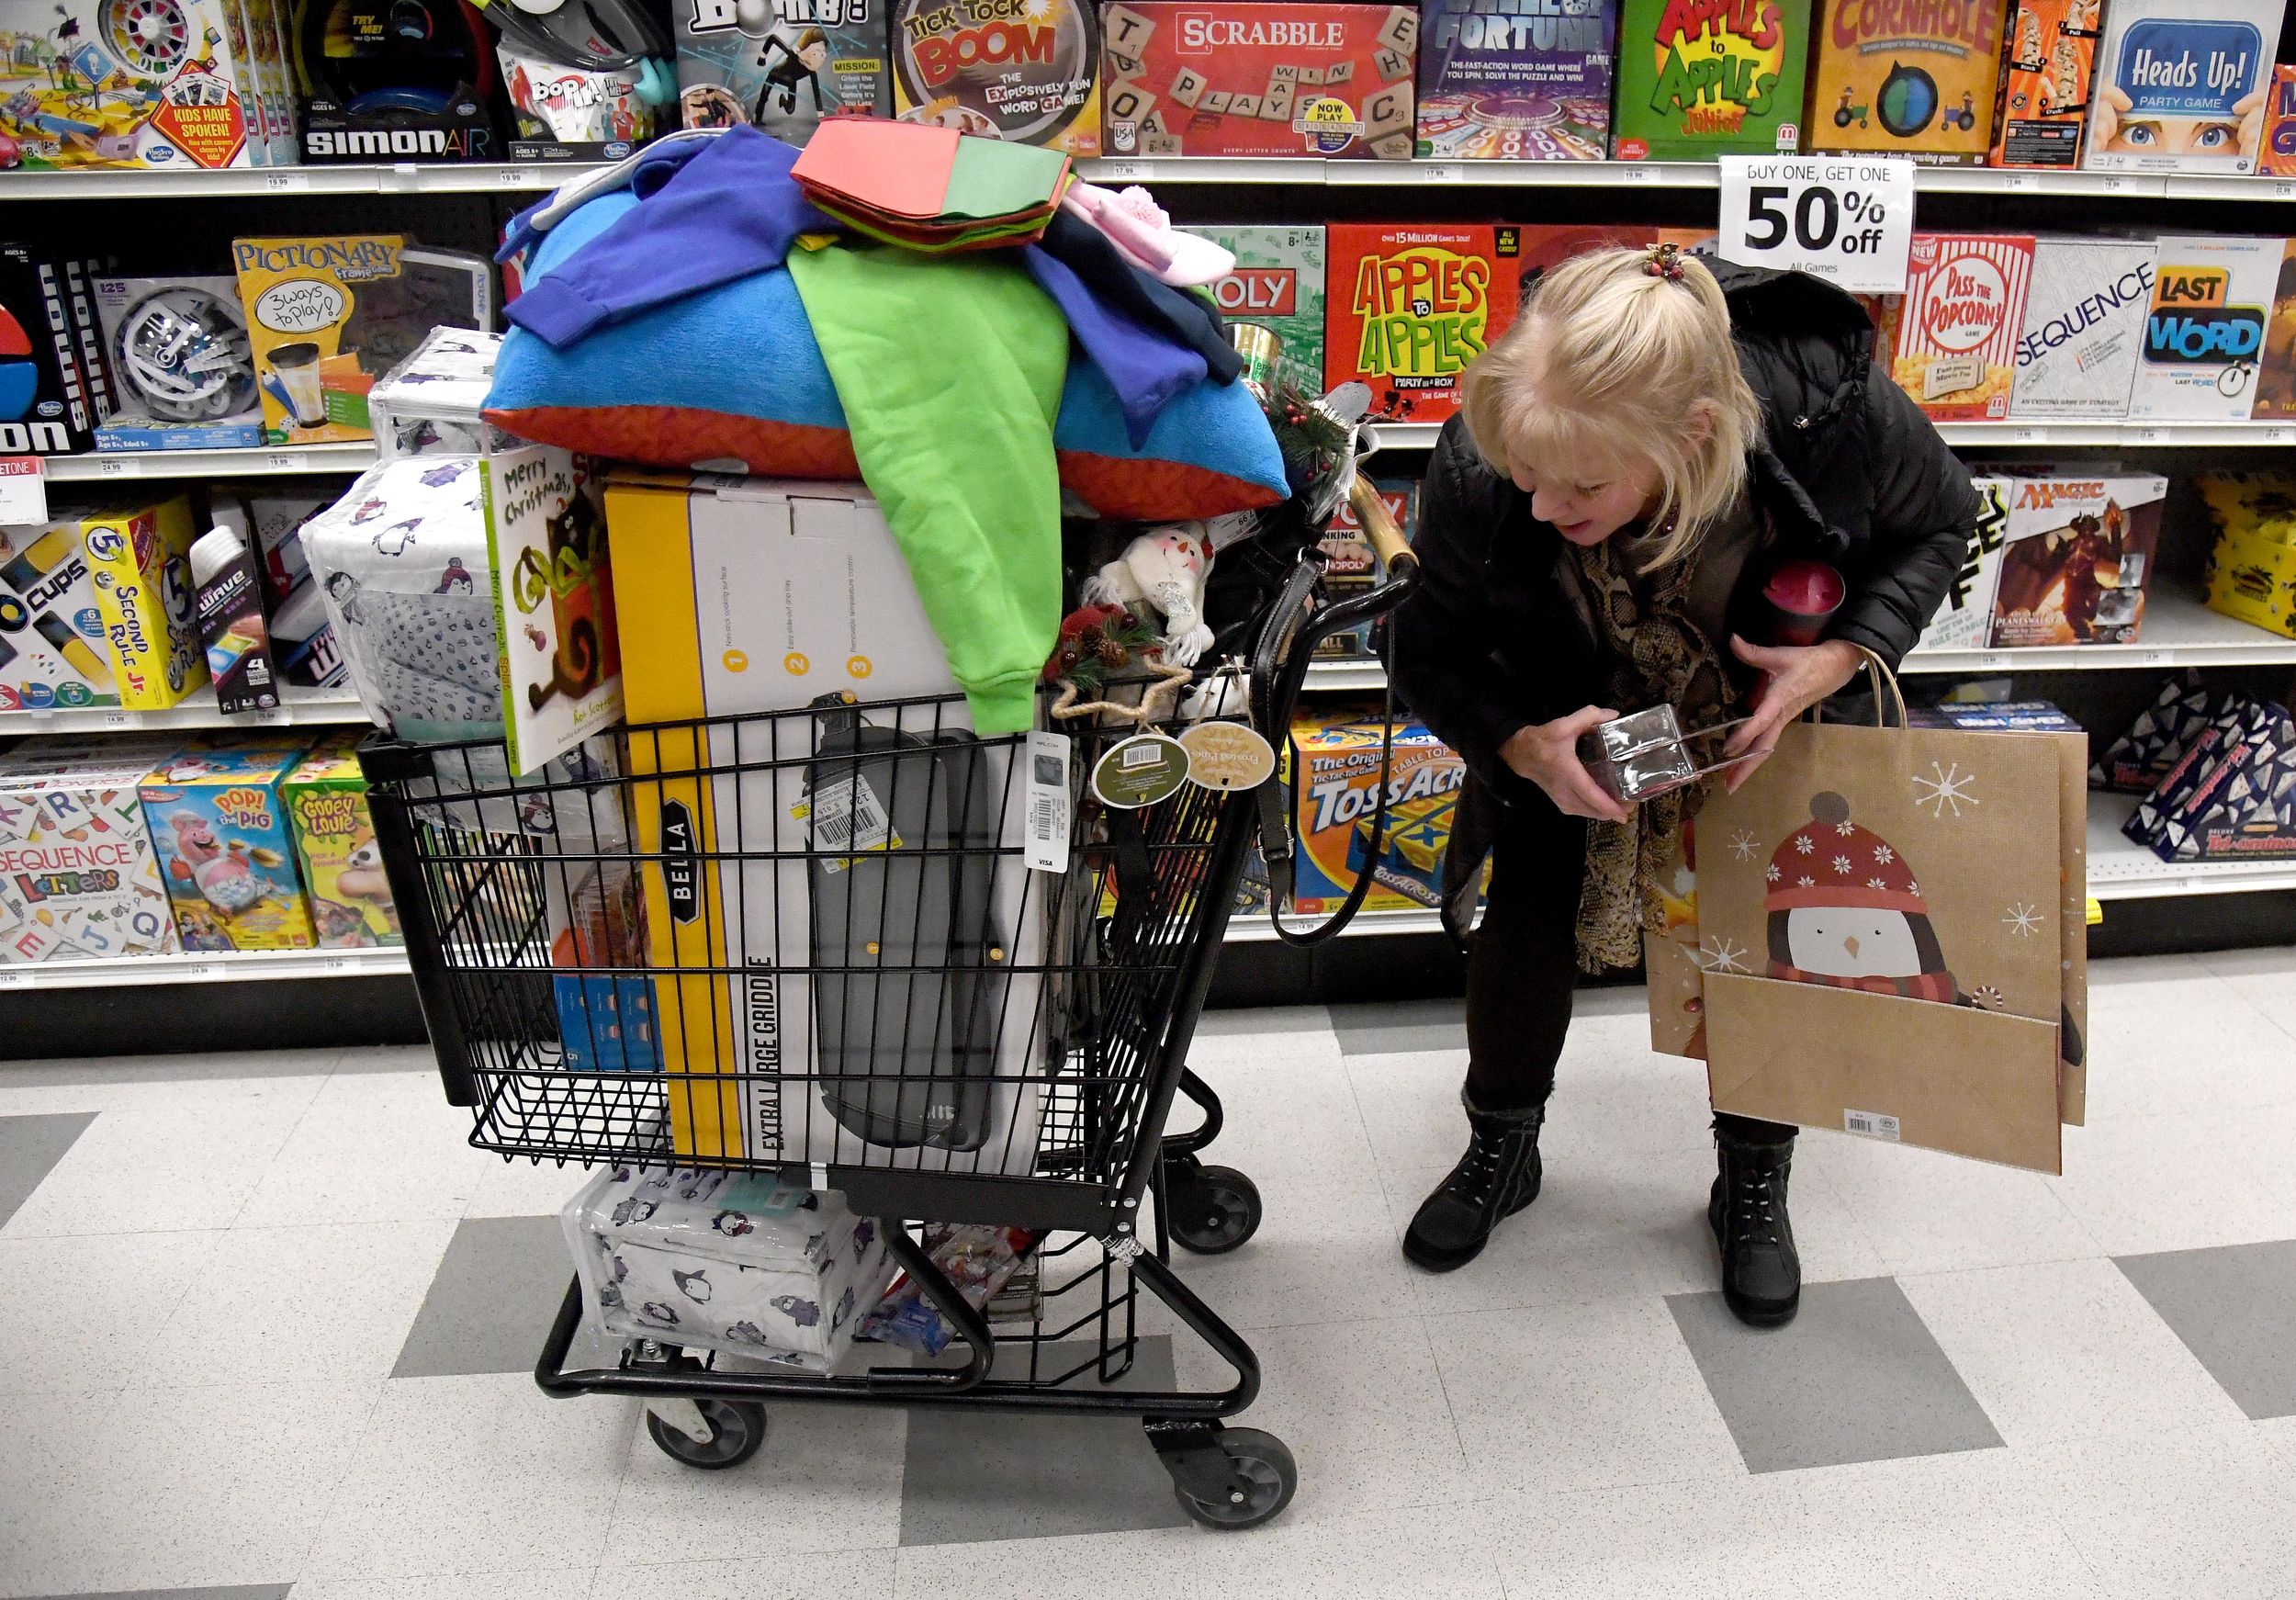 Smaller crowds, fewer deals on Friday for Detroit-area shoppers